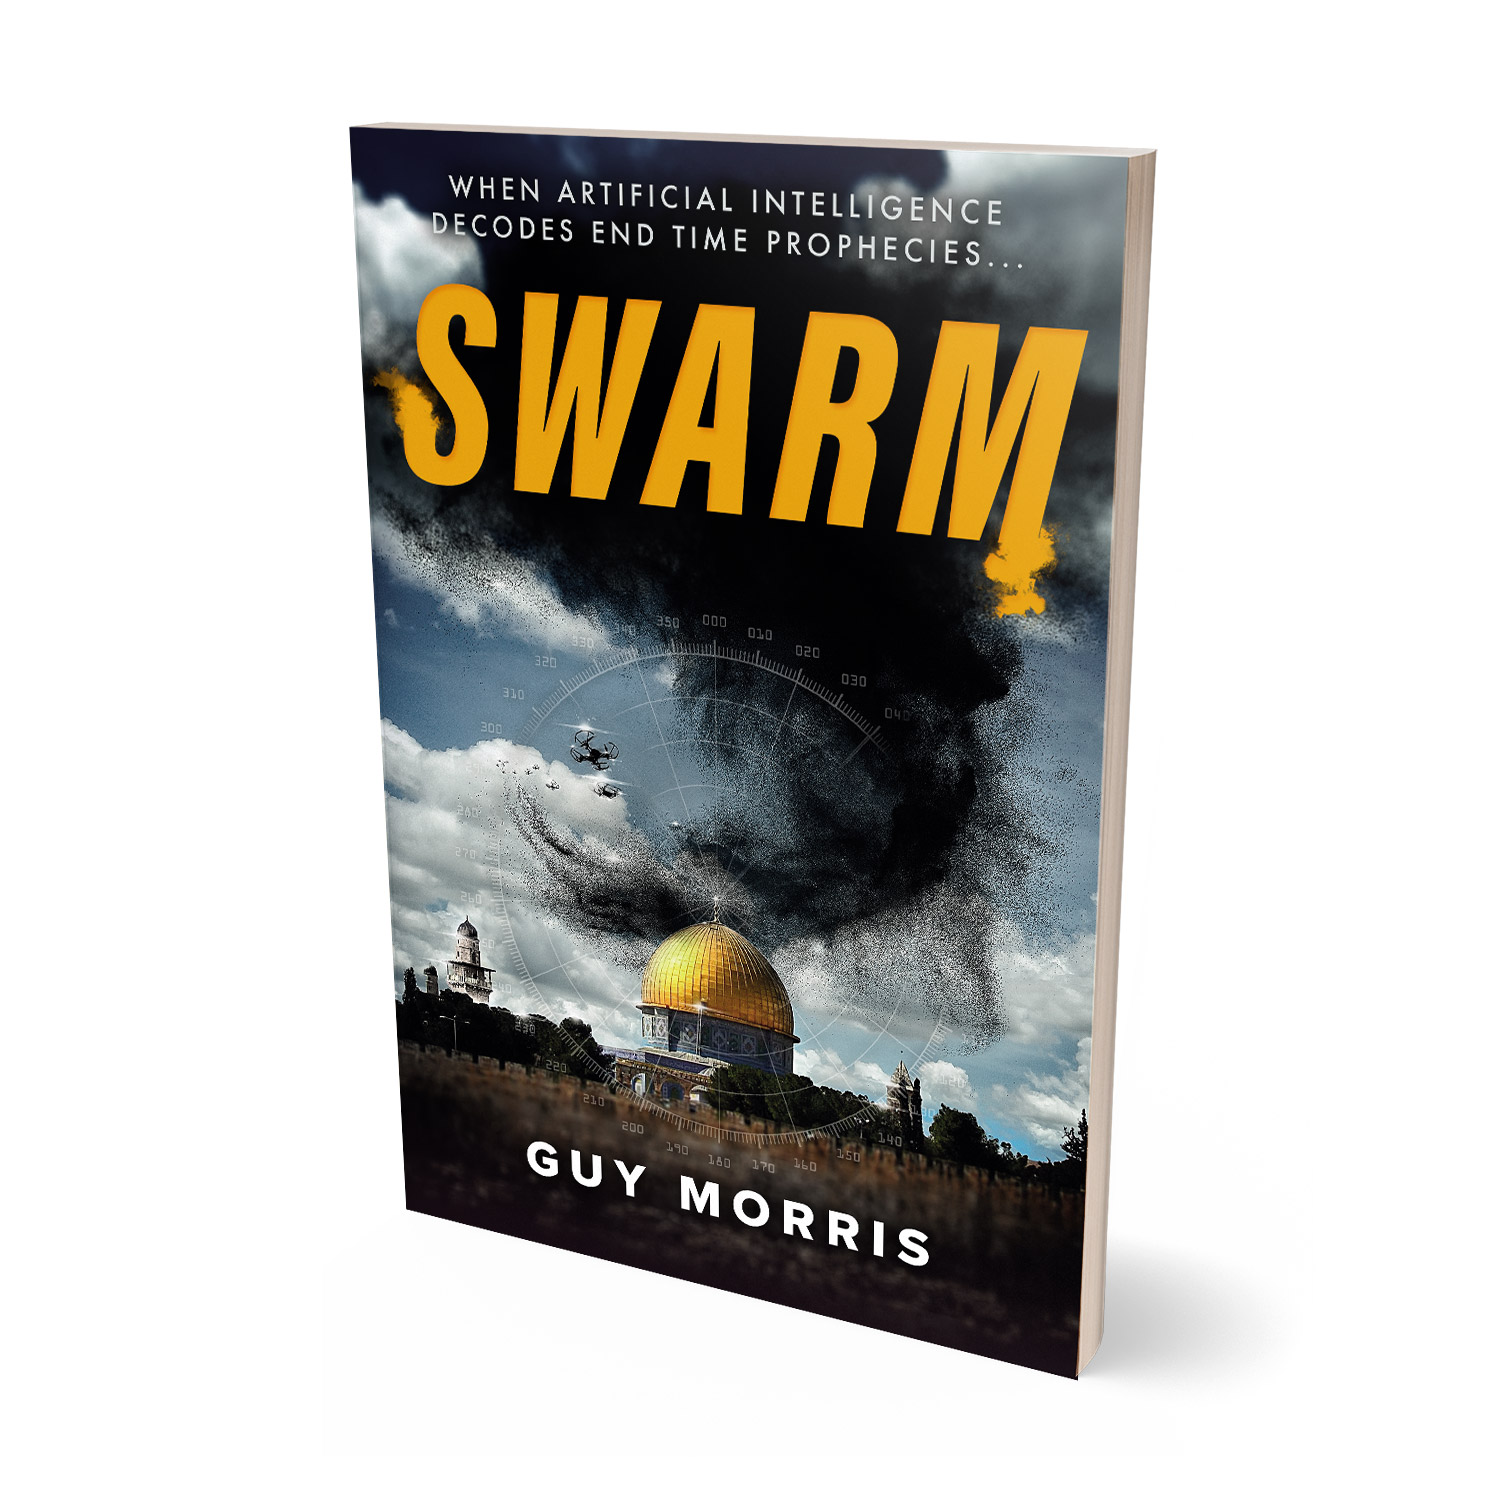 'Swarm' is a globe-spanning, apocalyptic AI tech thriller by author Guy Morris. The book cover and interior design are by Mark Thomas. To learn more about what Mark could do for your book, please visit coverness.com.